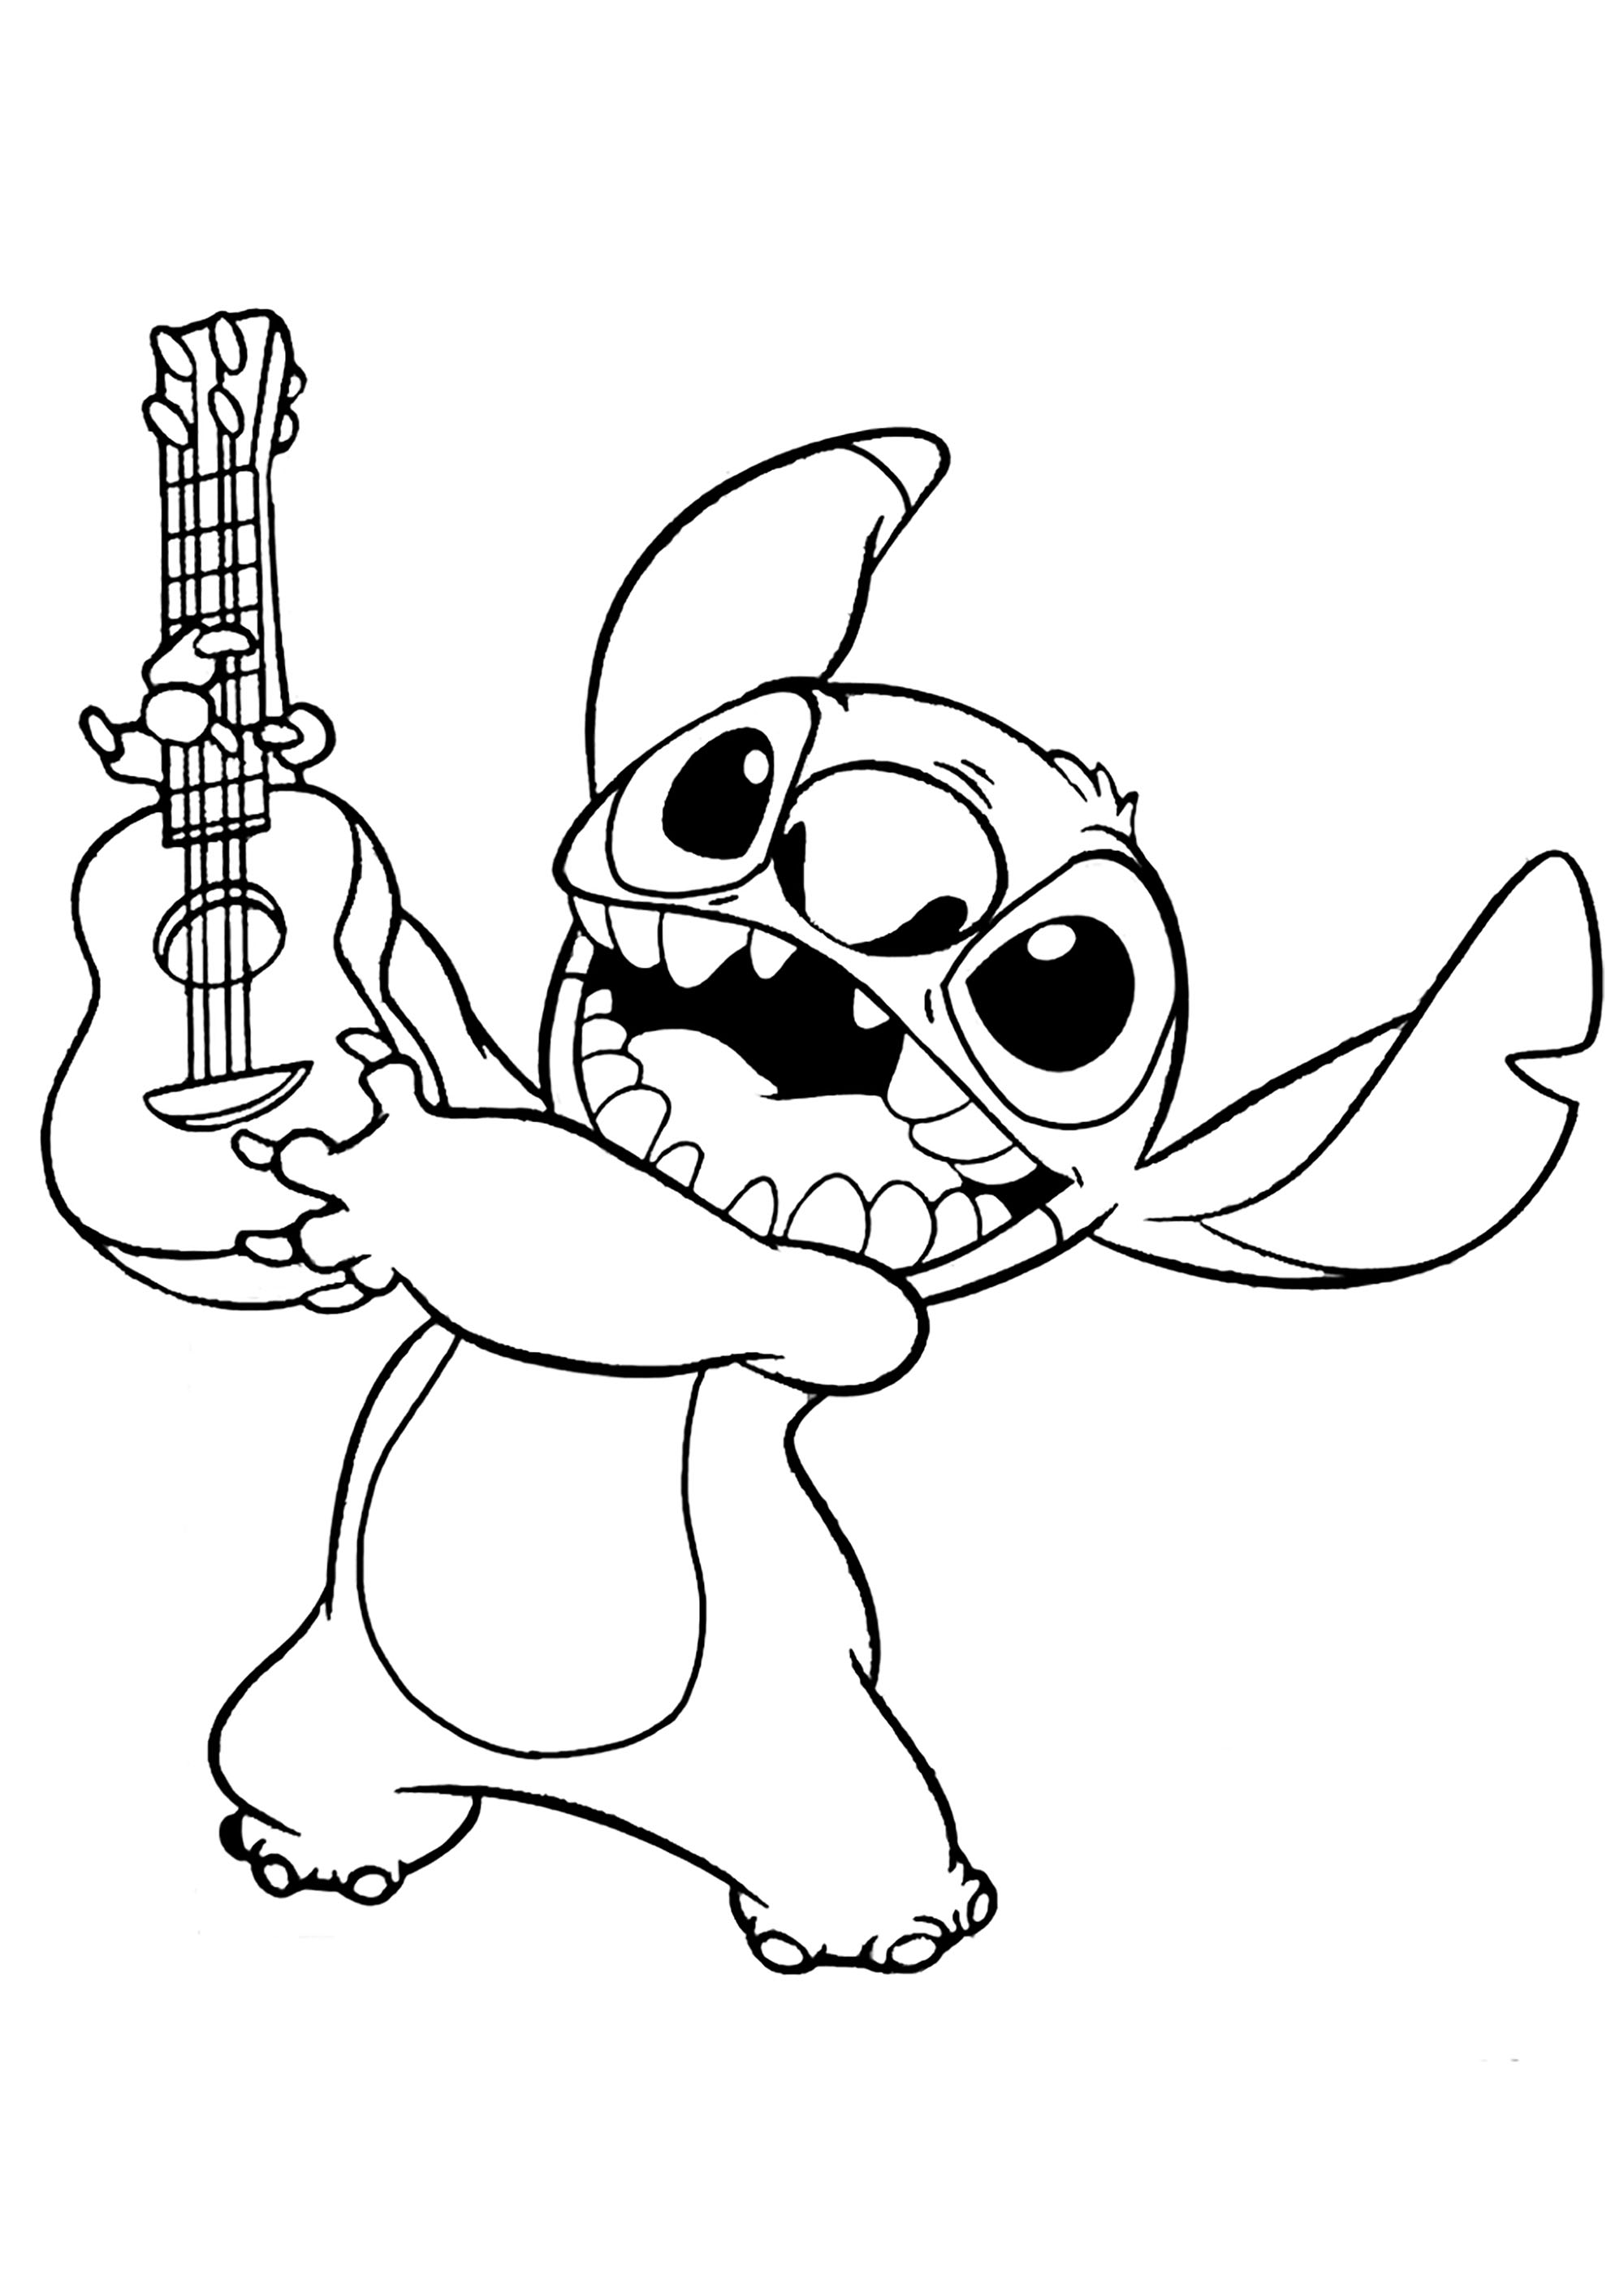 Lilo and stich coloring pages to print for free - Lilo And Stich Kids